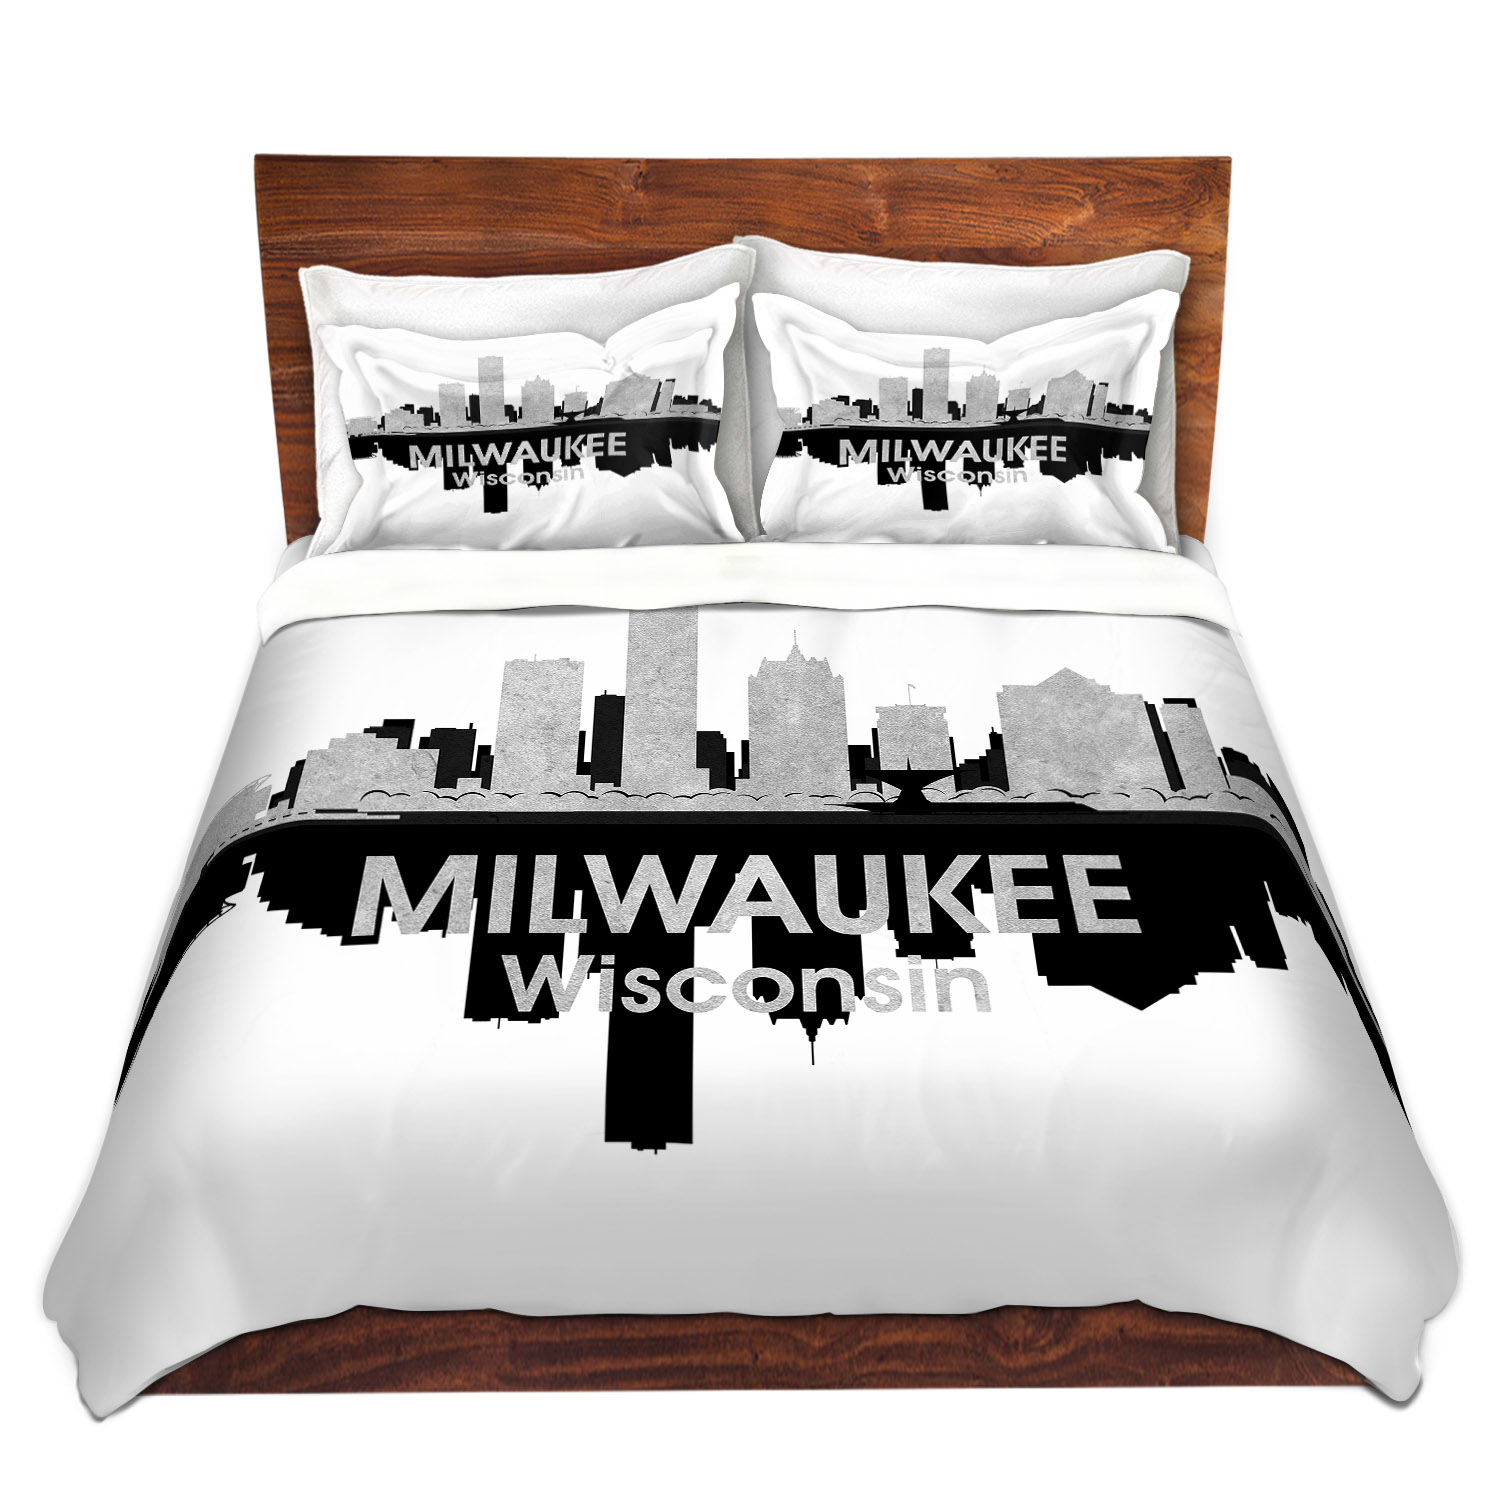 Dianoche Microfiber Duvet Covers By Angelina Vick - City Iv Milwaukee Wisconsin